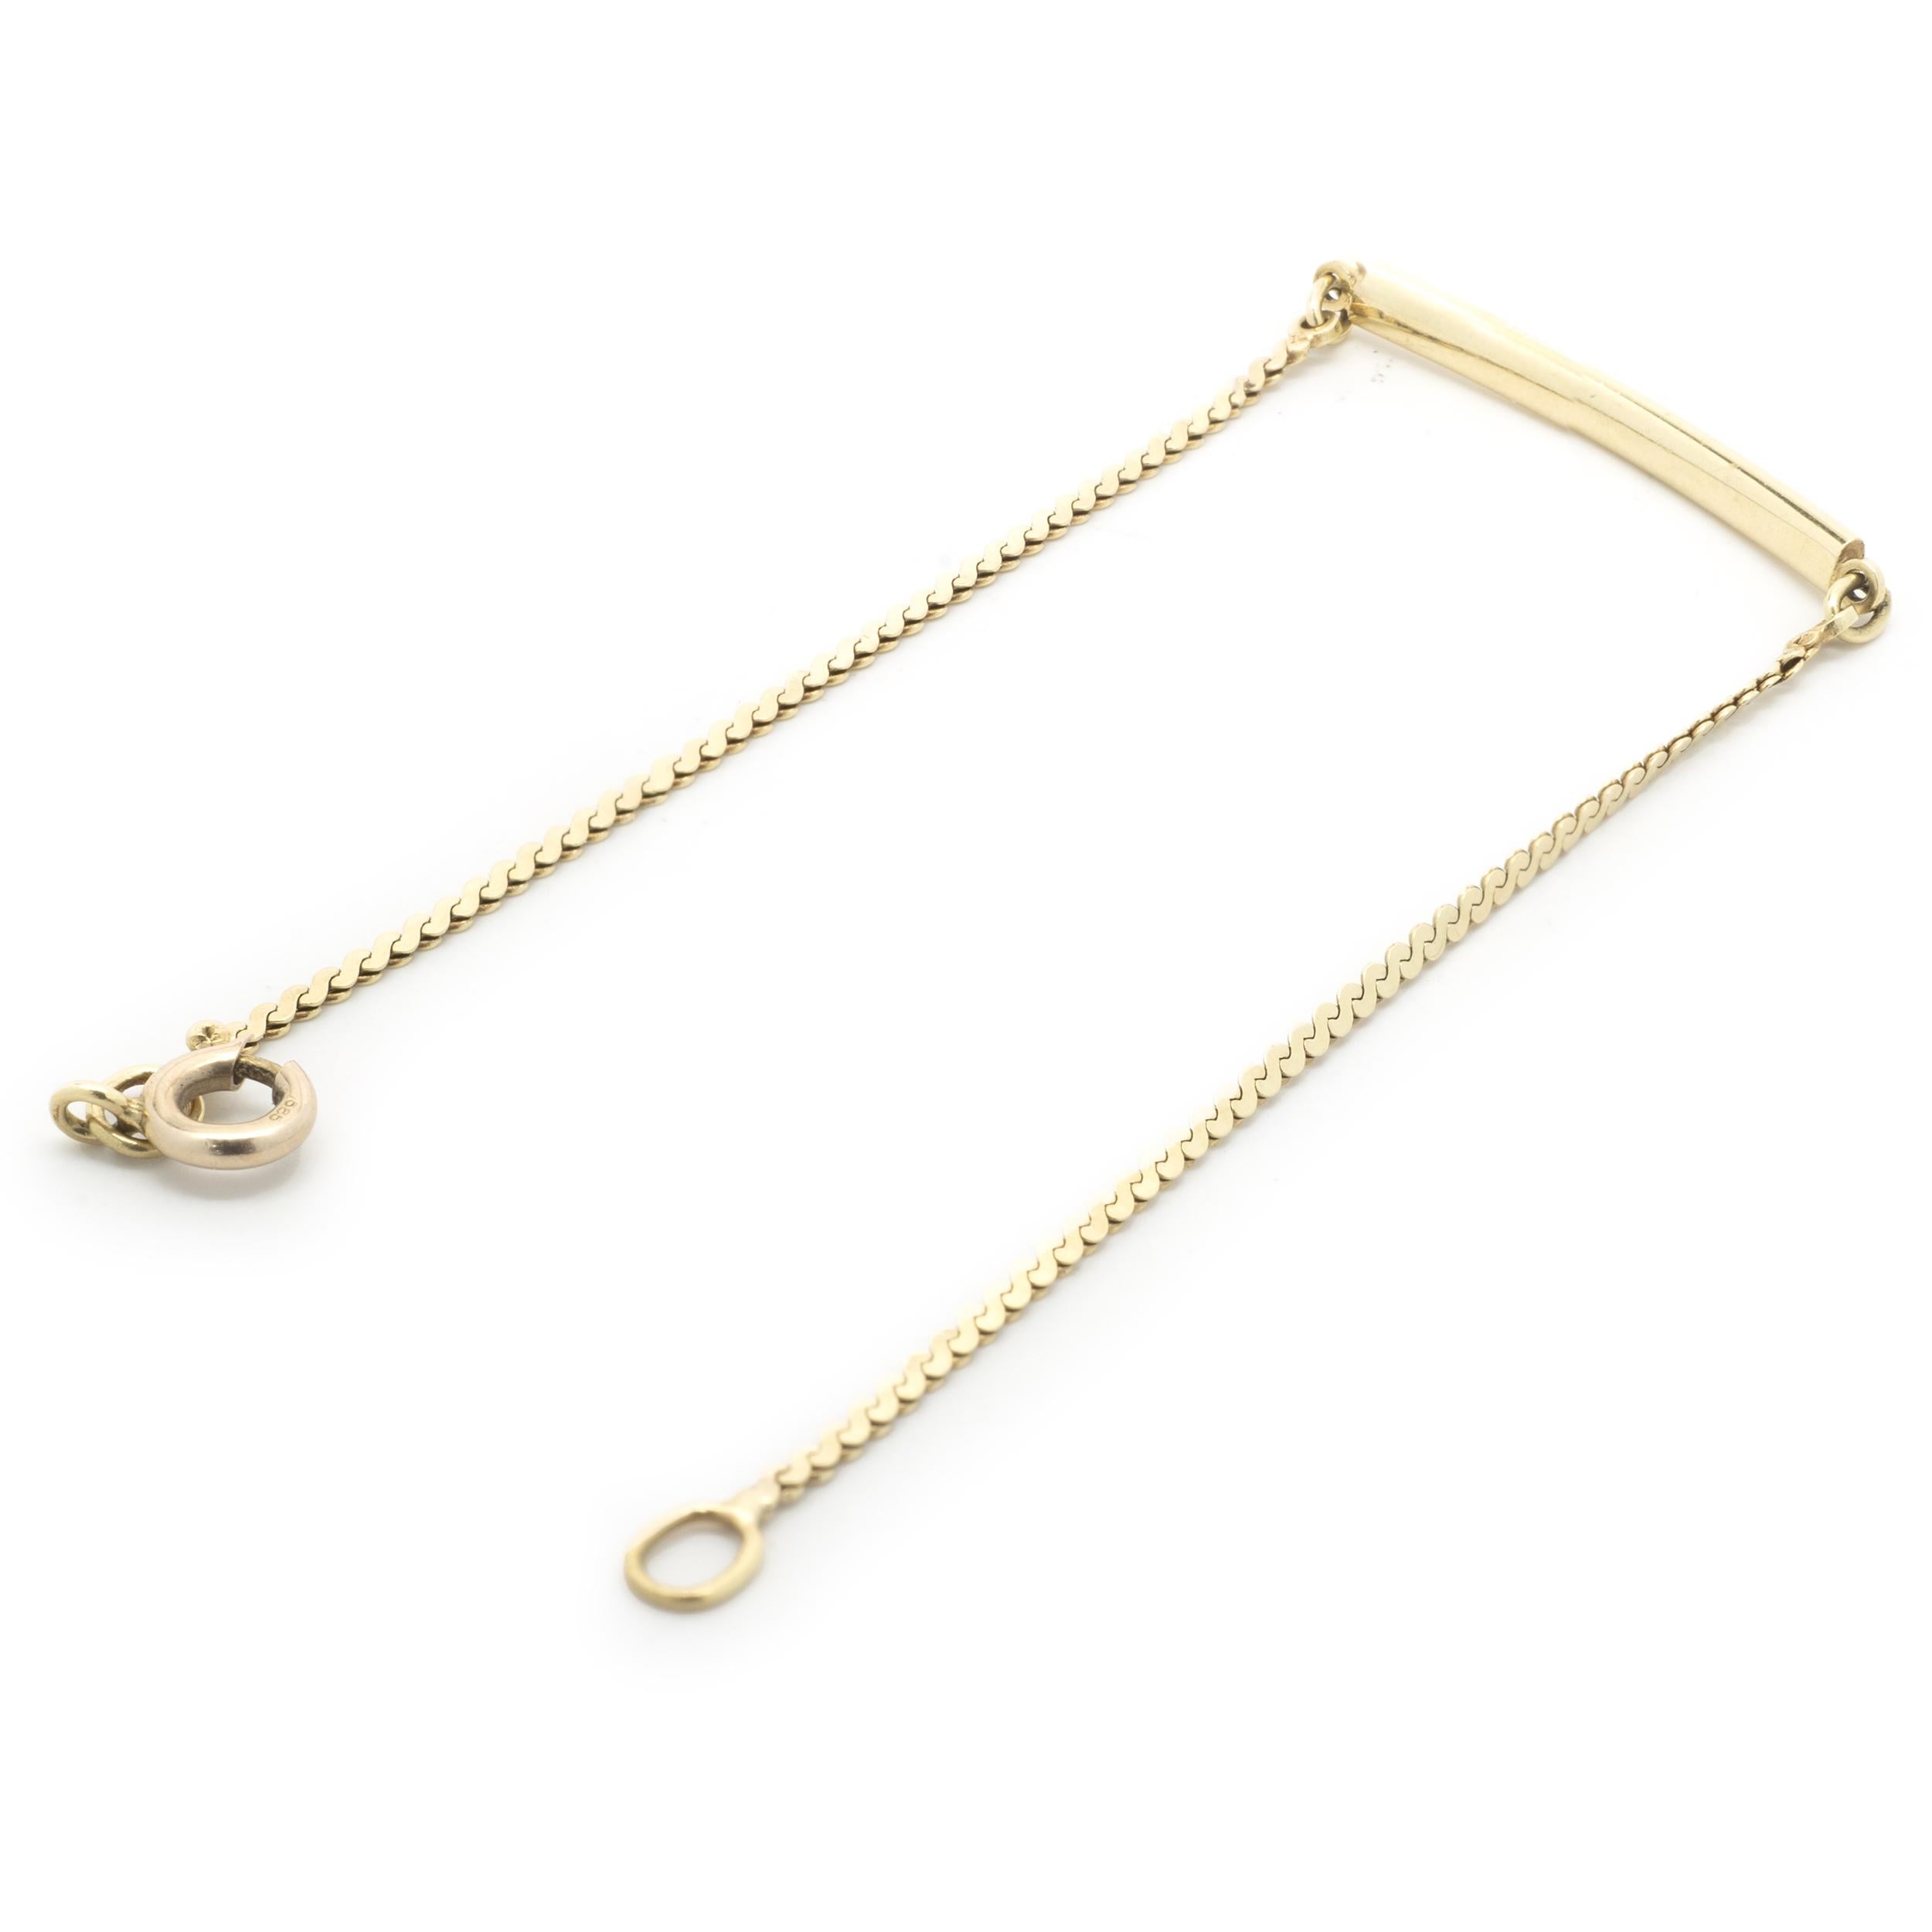 Material: 14k yellow gold
Dimensions: bracelet measures 7-inches in length
Weight: 2.22 grams
